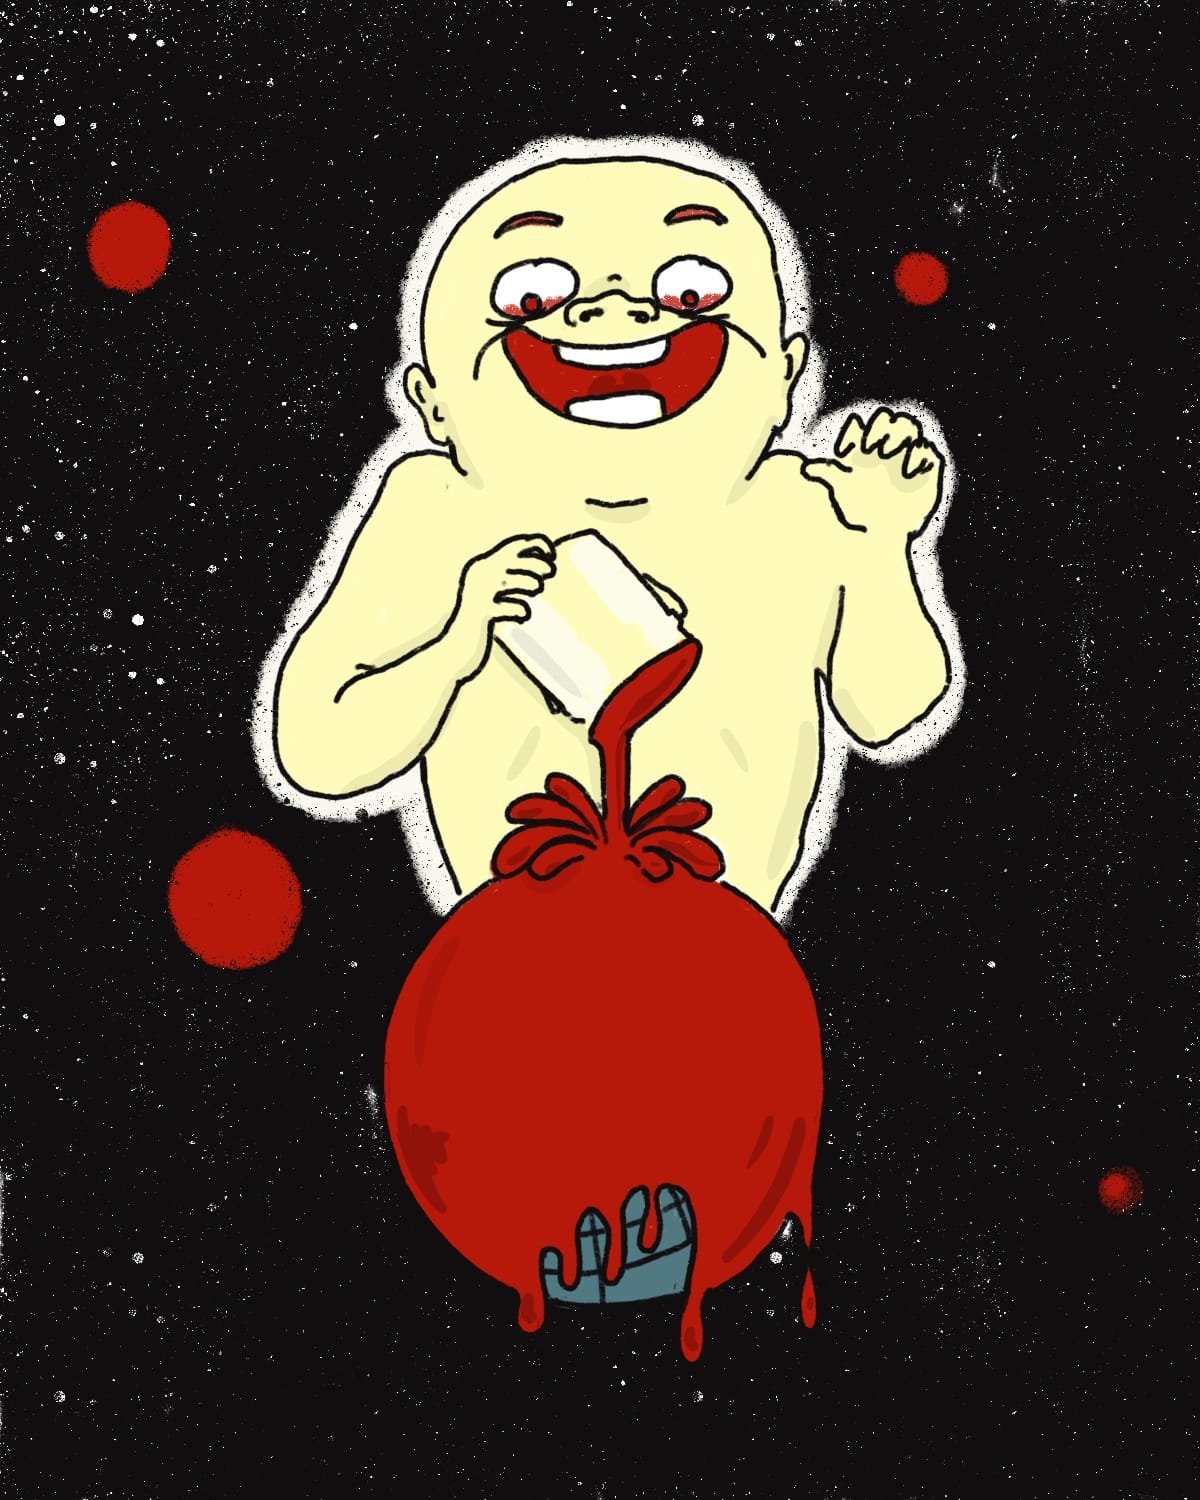 A demonic baby-looking evil genius suspended in space, upending a can of red paint over the Earth